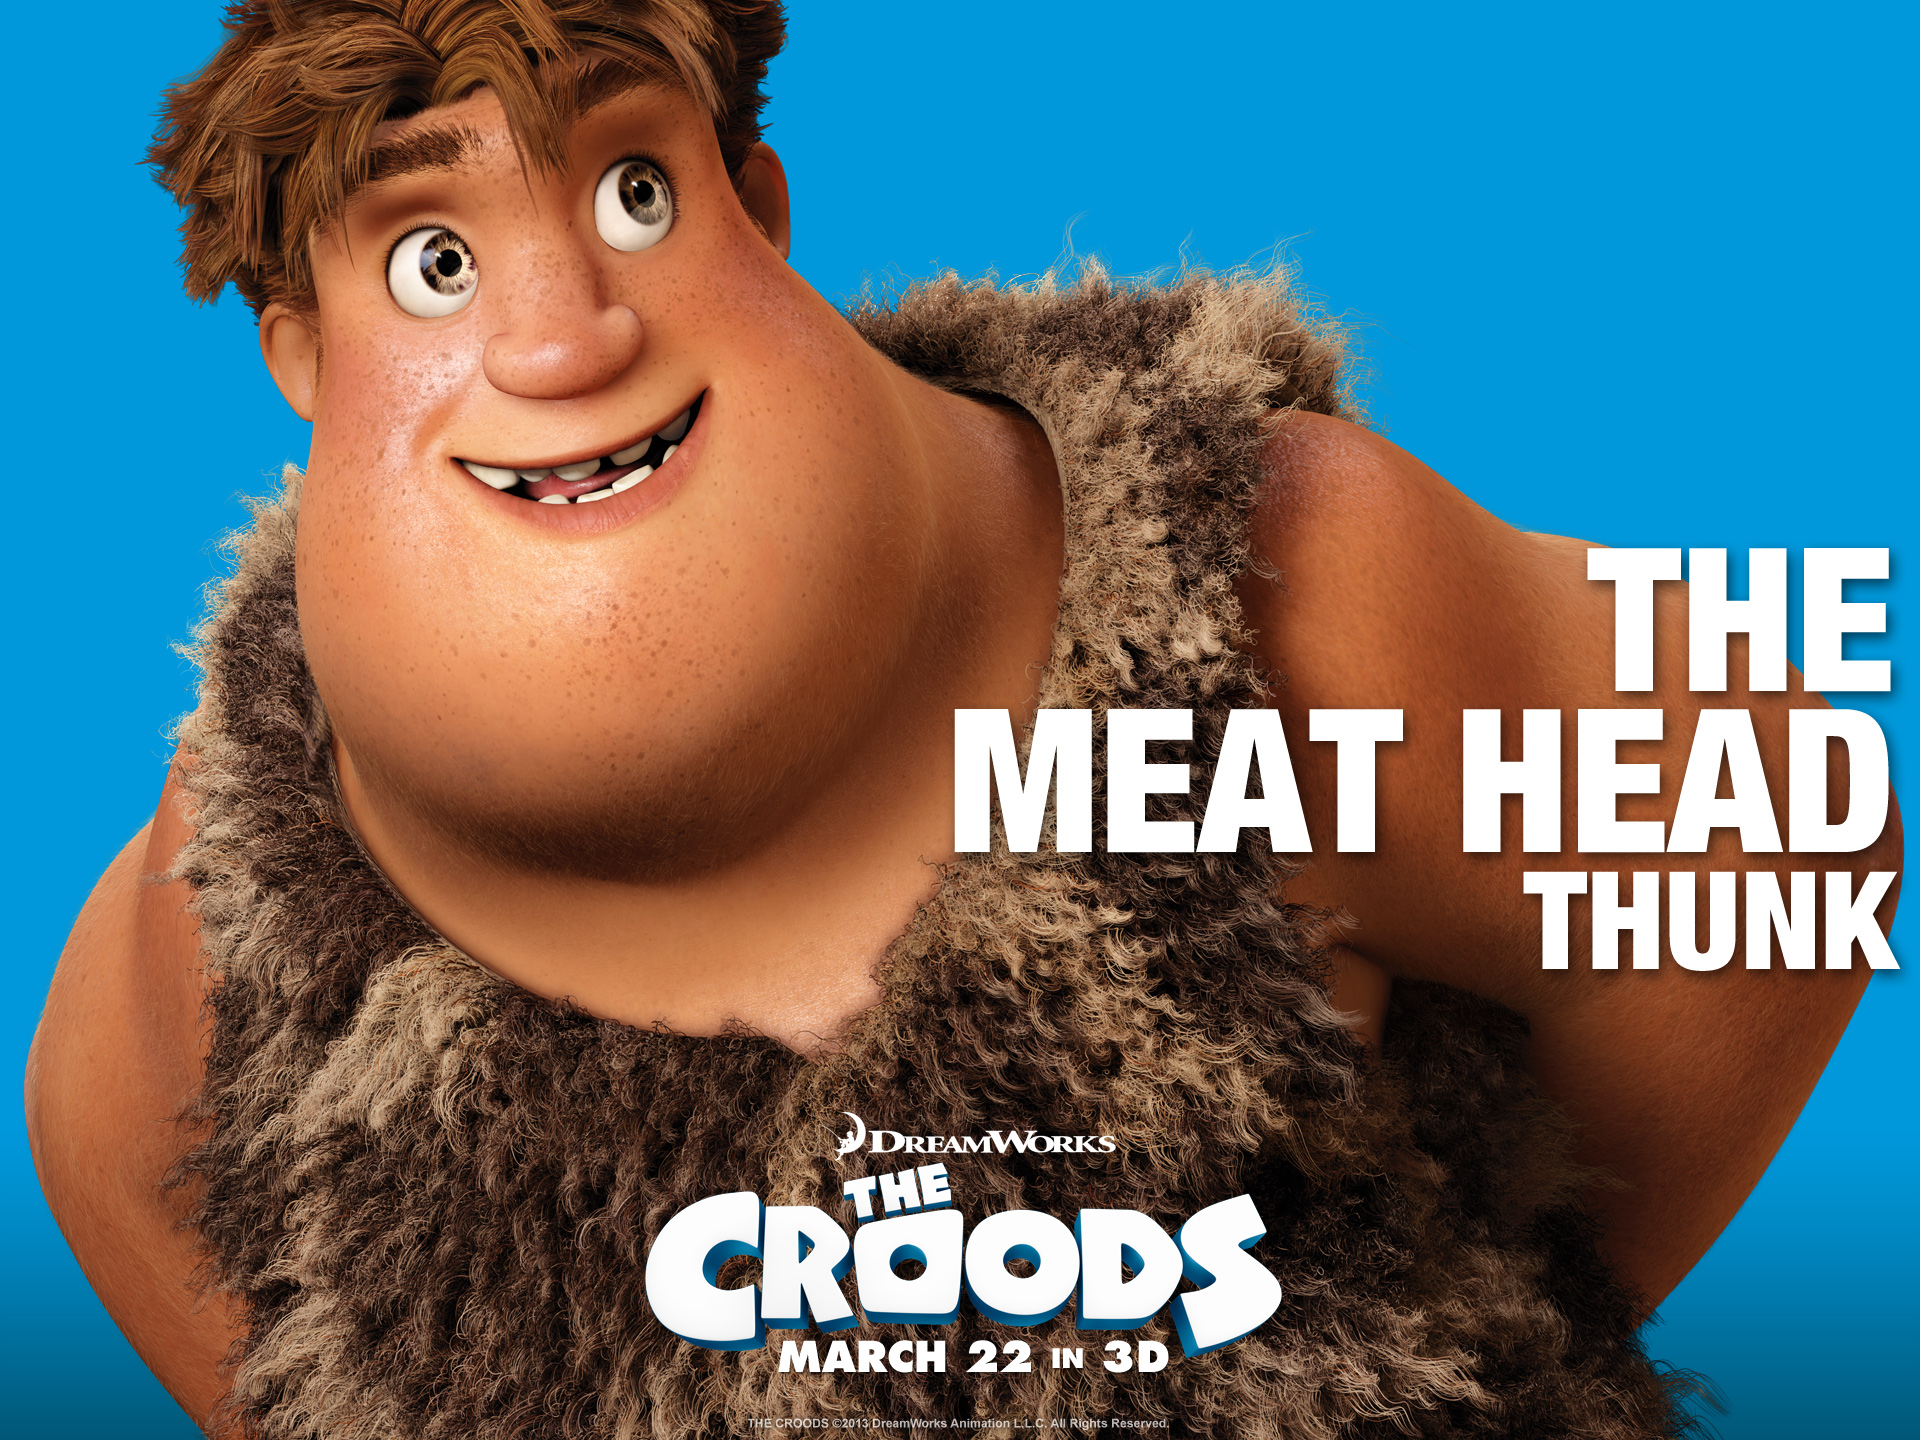 movie, the croods, thunk (the croods)